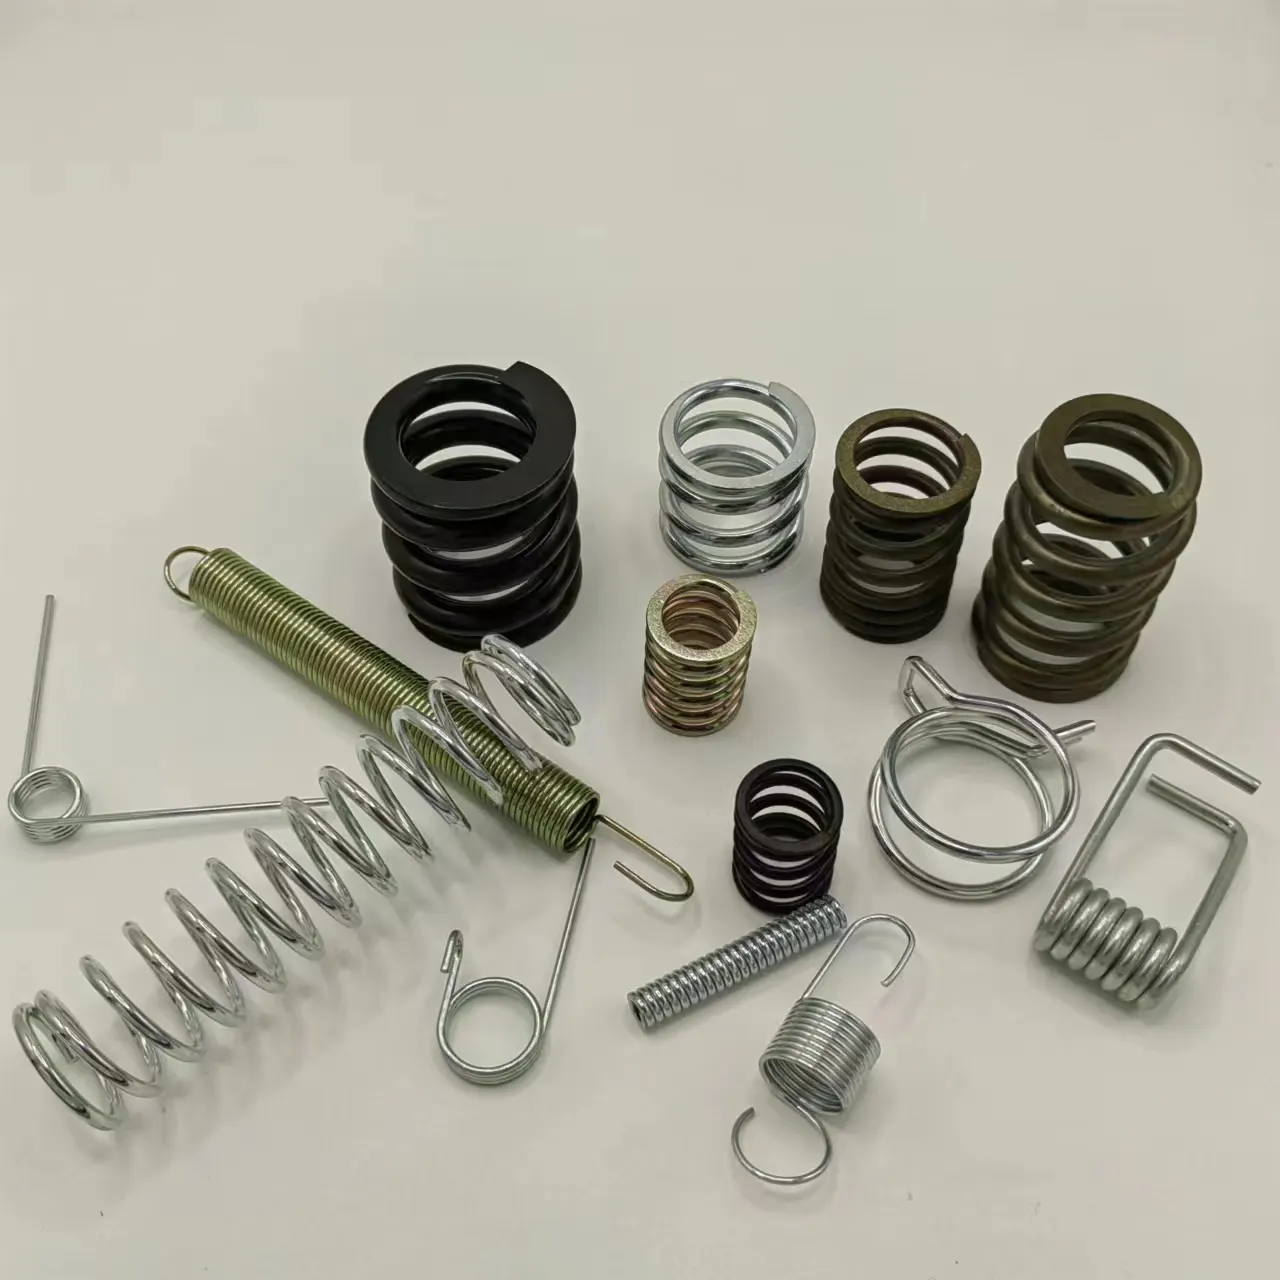 Spring manufacturers specialize in customizing various high-precision carbon steel and stainless steel springs